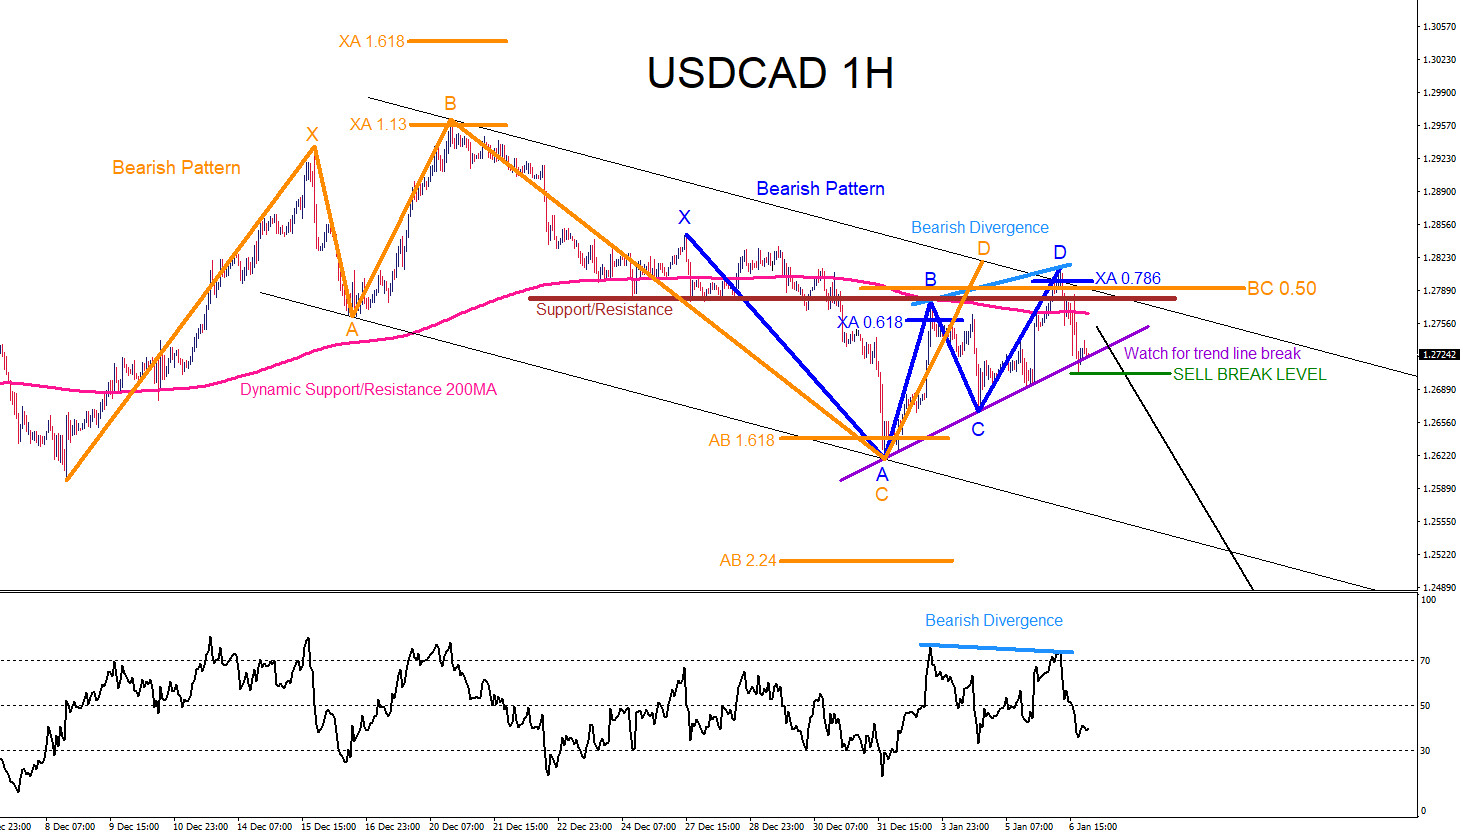 USDCAD : Market Patterns Signalled the Move Lower